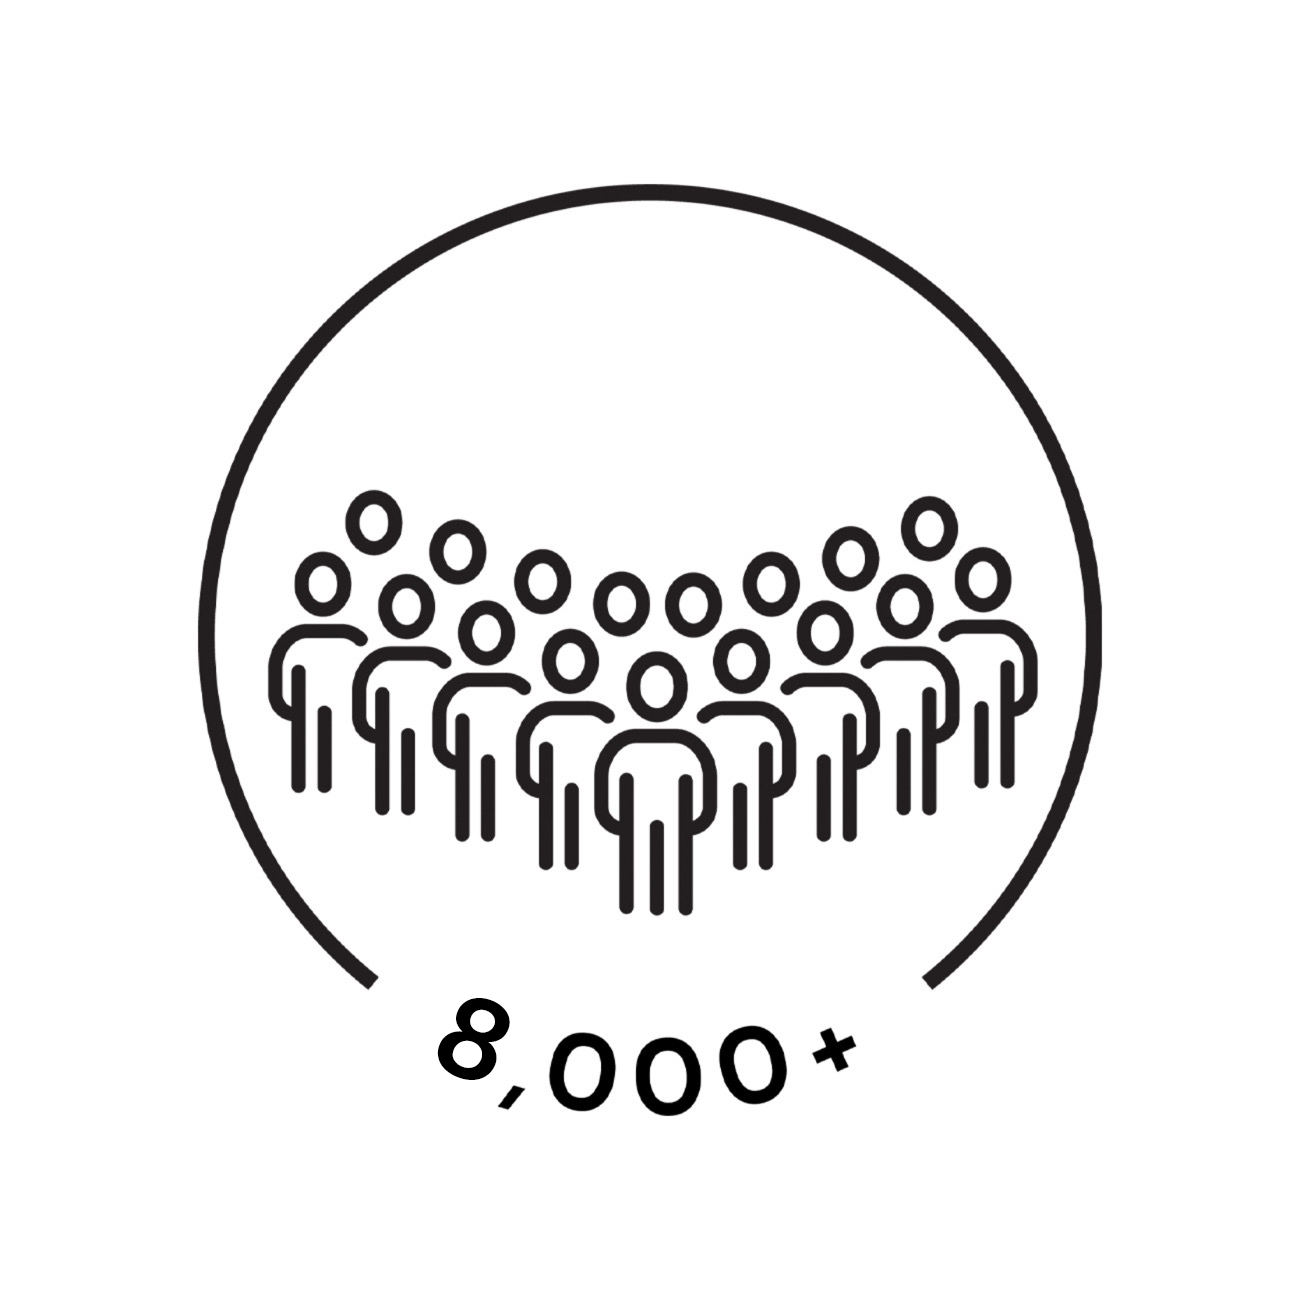 Over 8000 Employees Icon